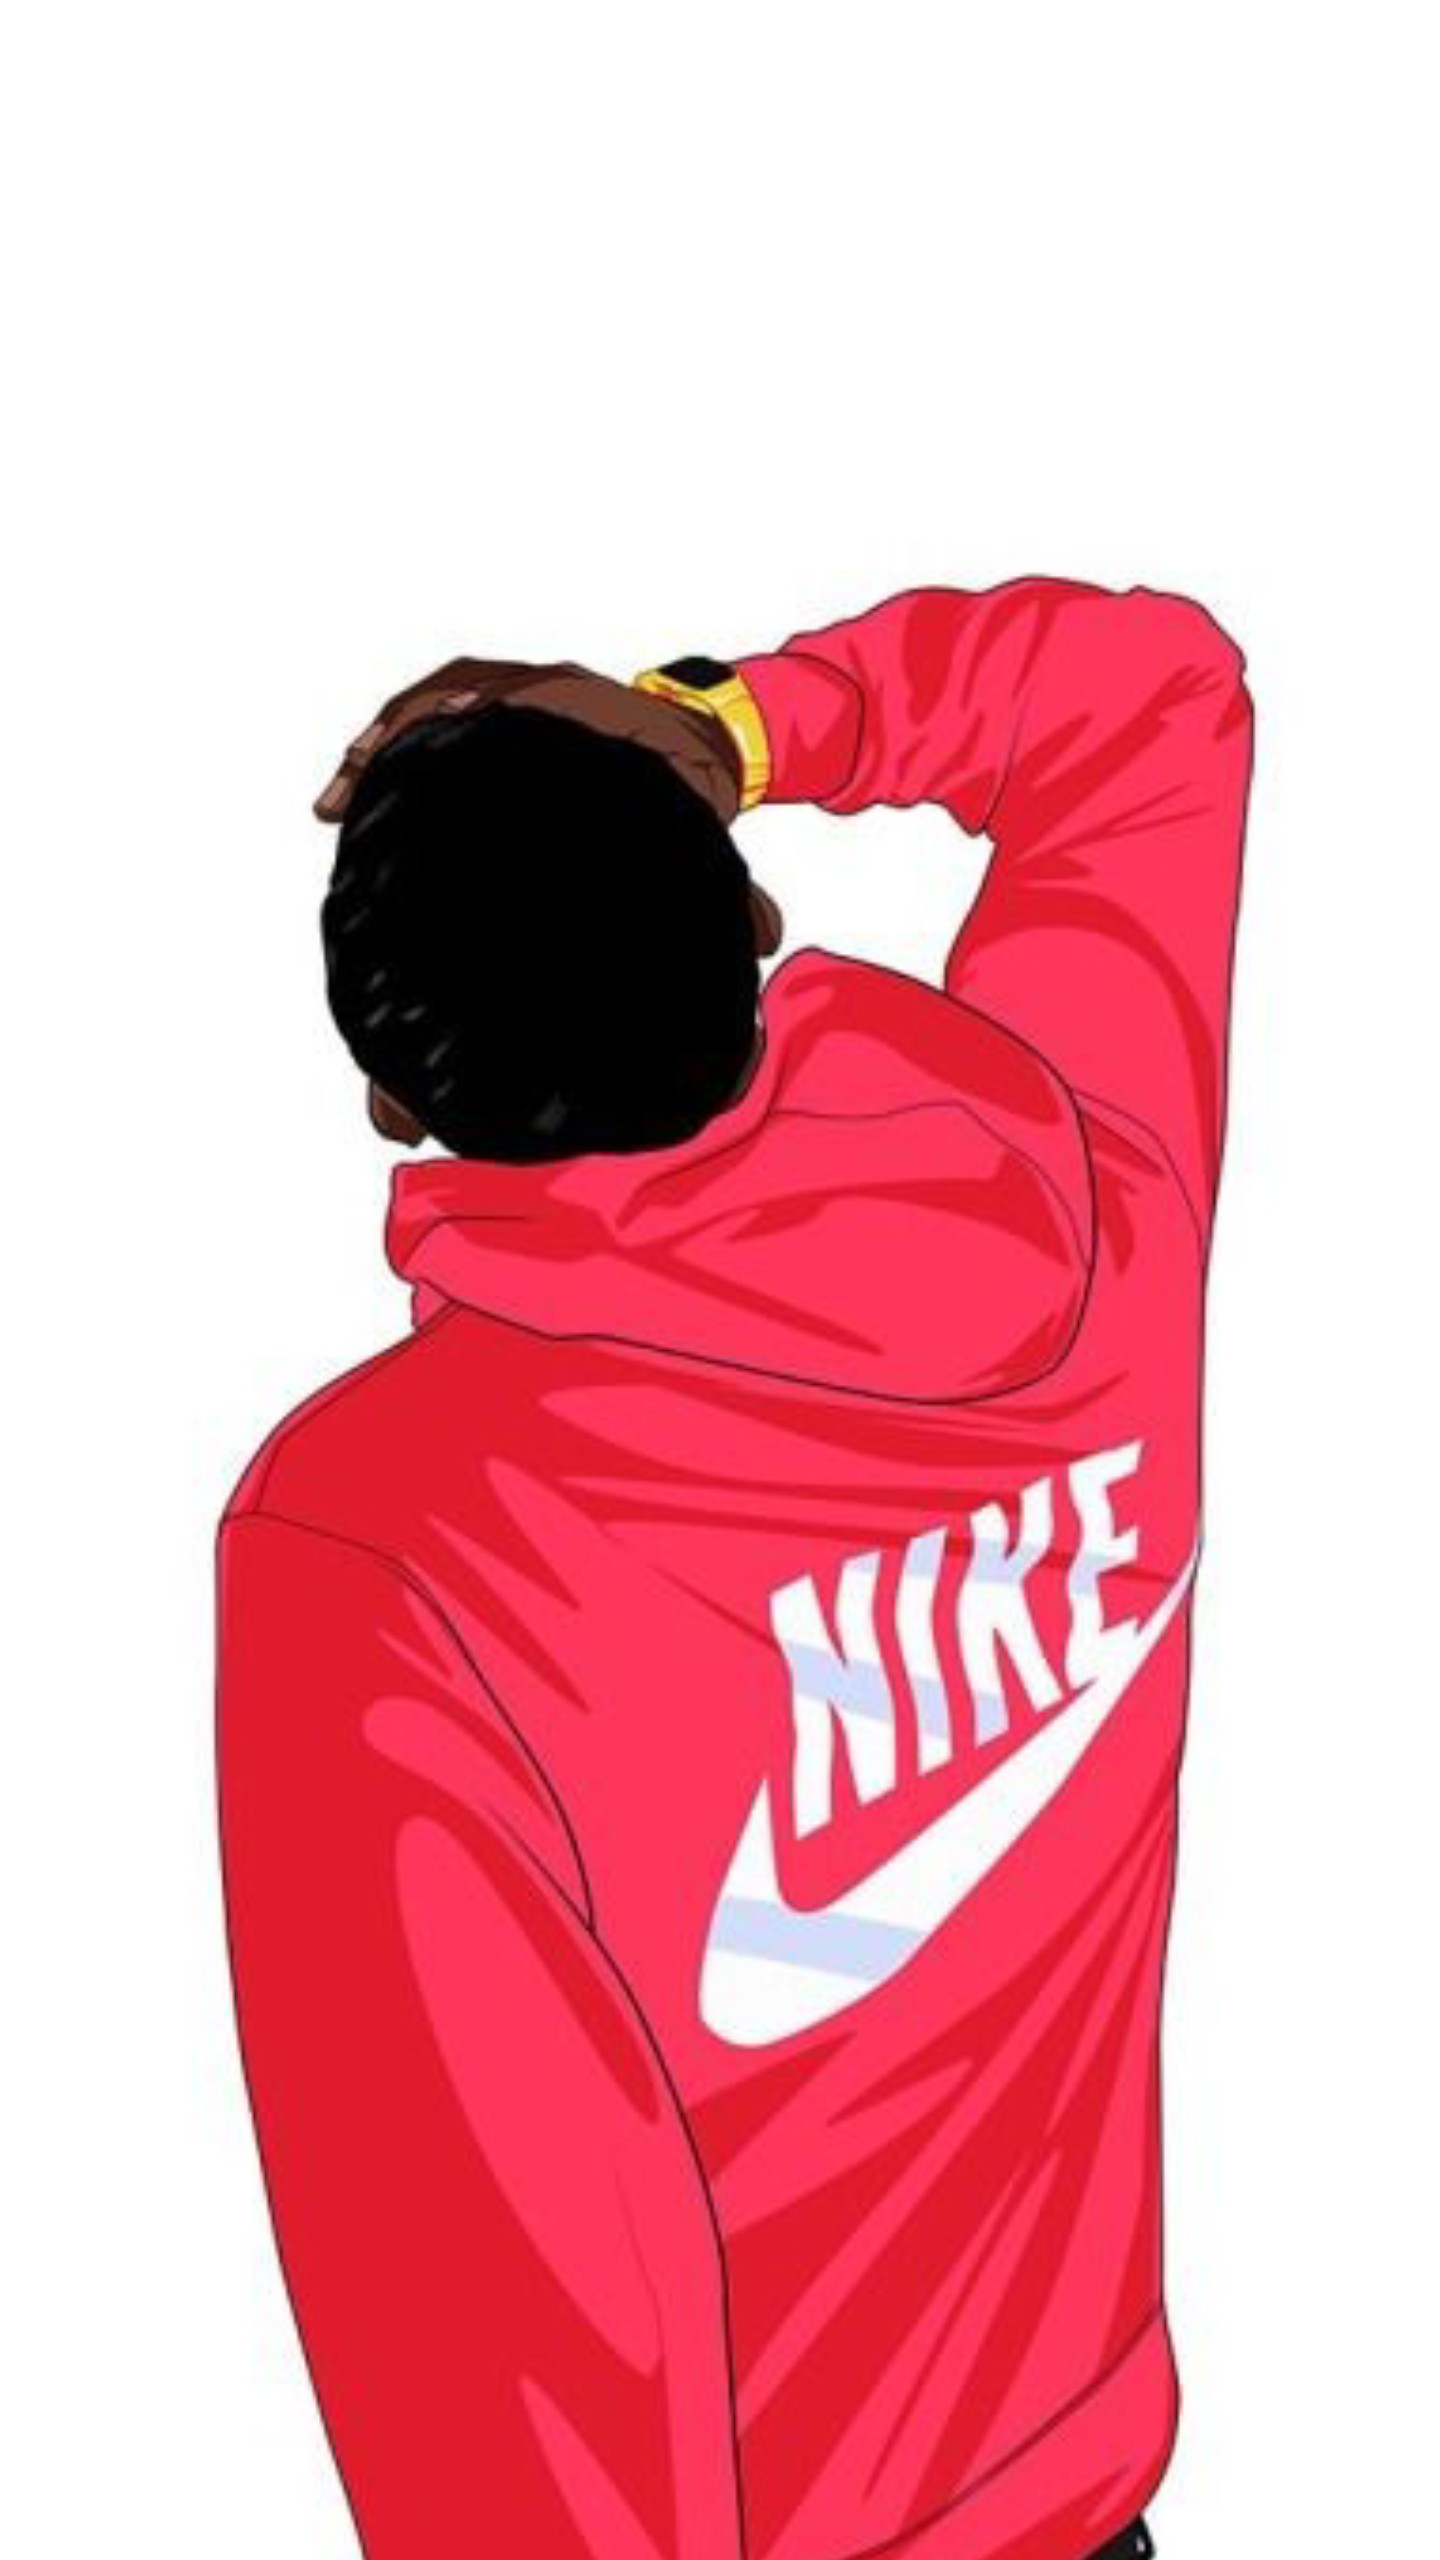 nike boy wallpaper, Latest trends, OFF 73%, shas.co.in